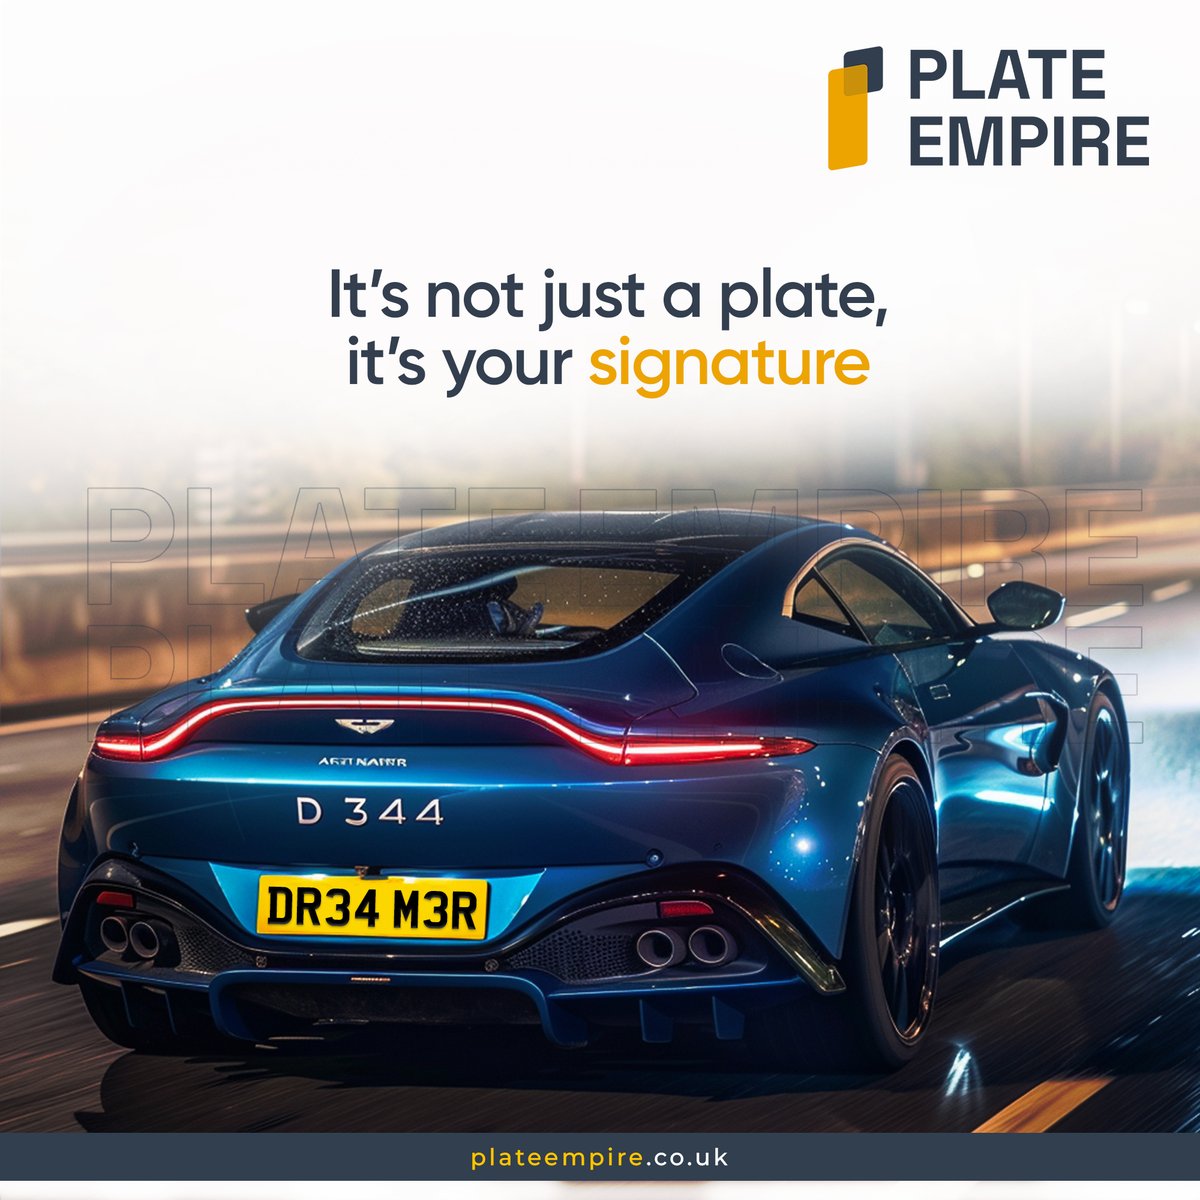 Make it memorable, make it yours. It's not just a plate, it's your signature ride! Drive with distinction!

#plateempire #customplates #rideinstyle #uniqueplates #carsofinstagram #ukplates #ukplateshop #platesuk #carshow #carstagram #customizedplate #samedaydispatch